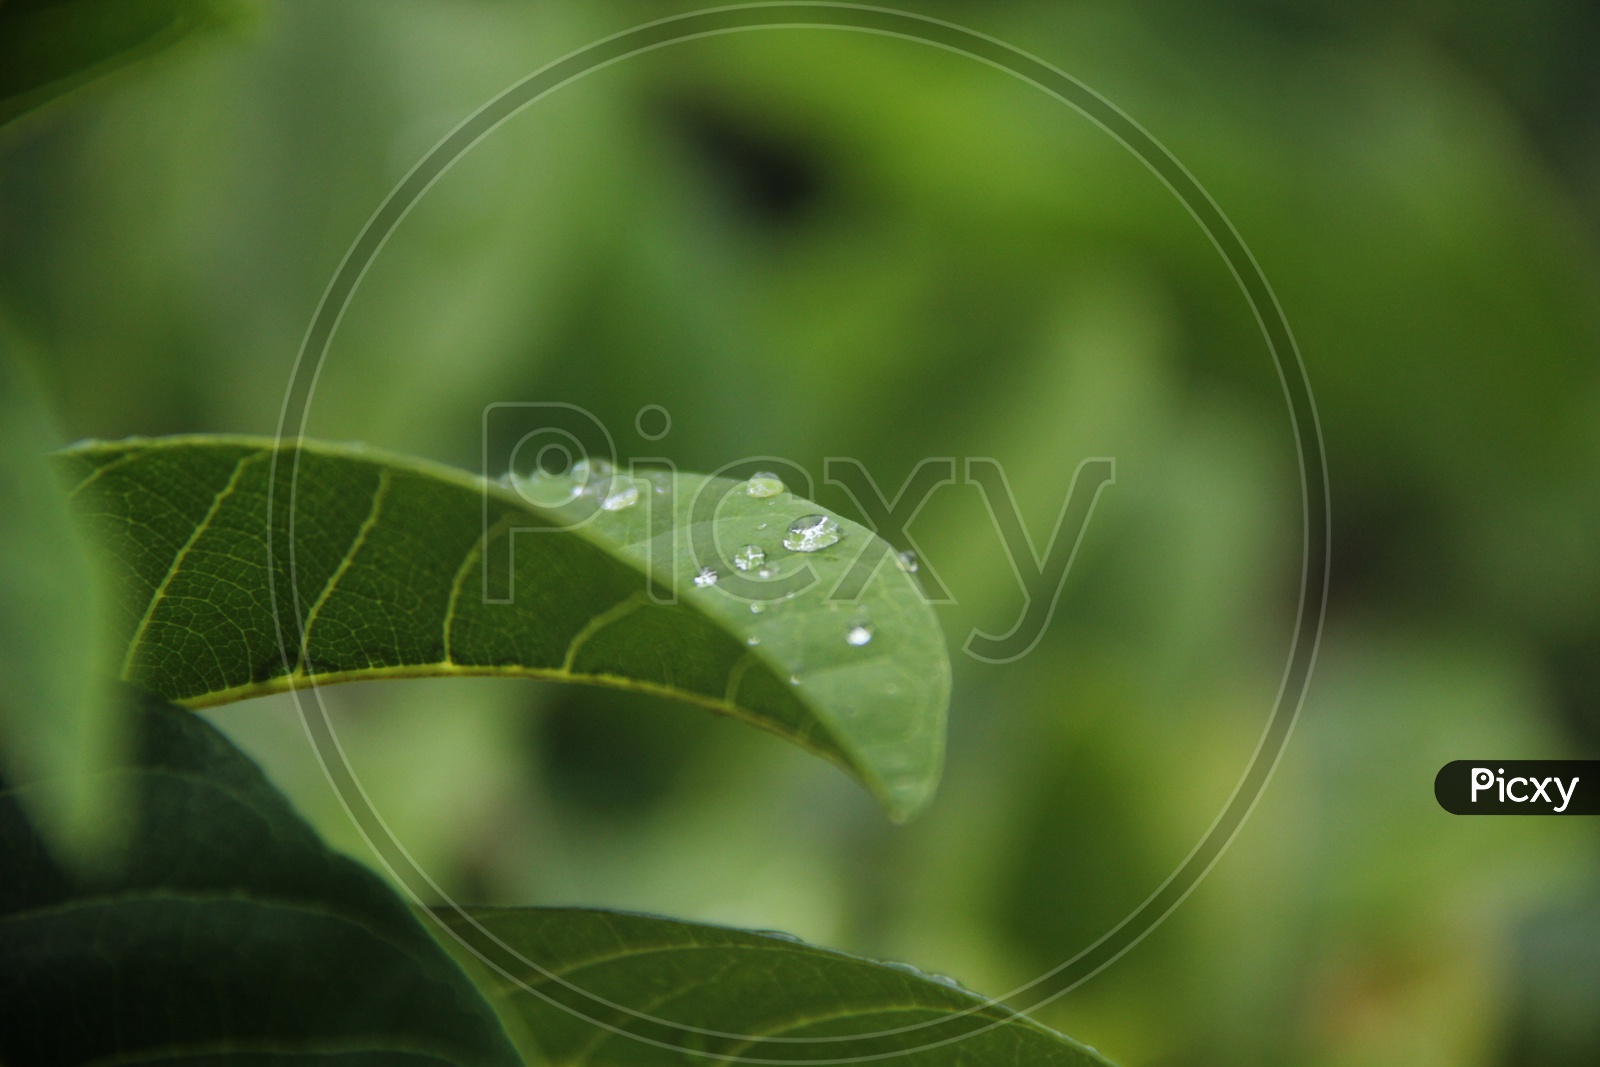 Water Drops on Leafs/ Water droplets